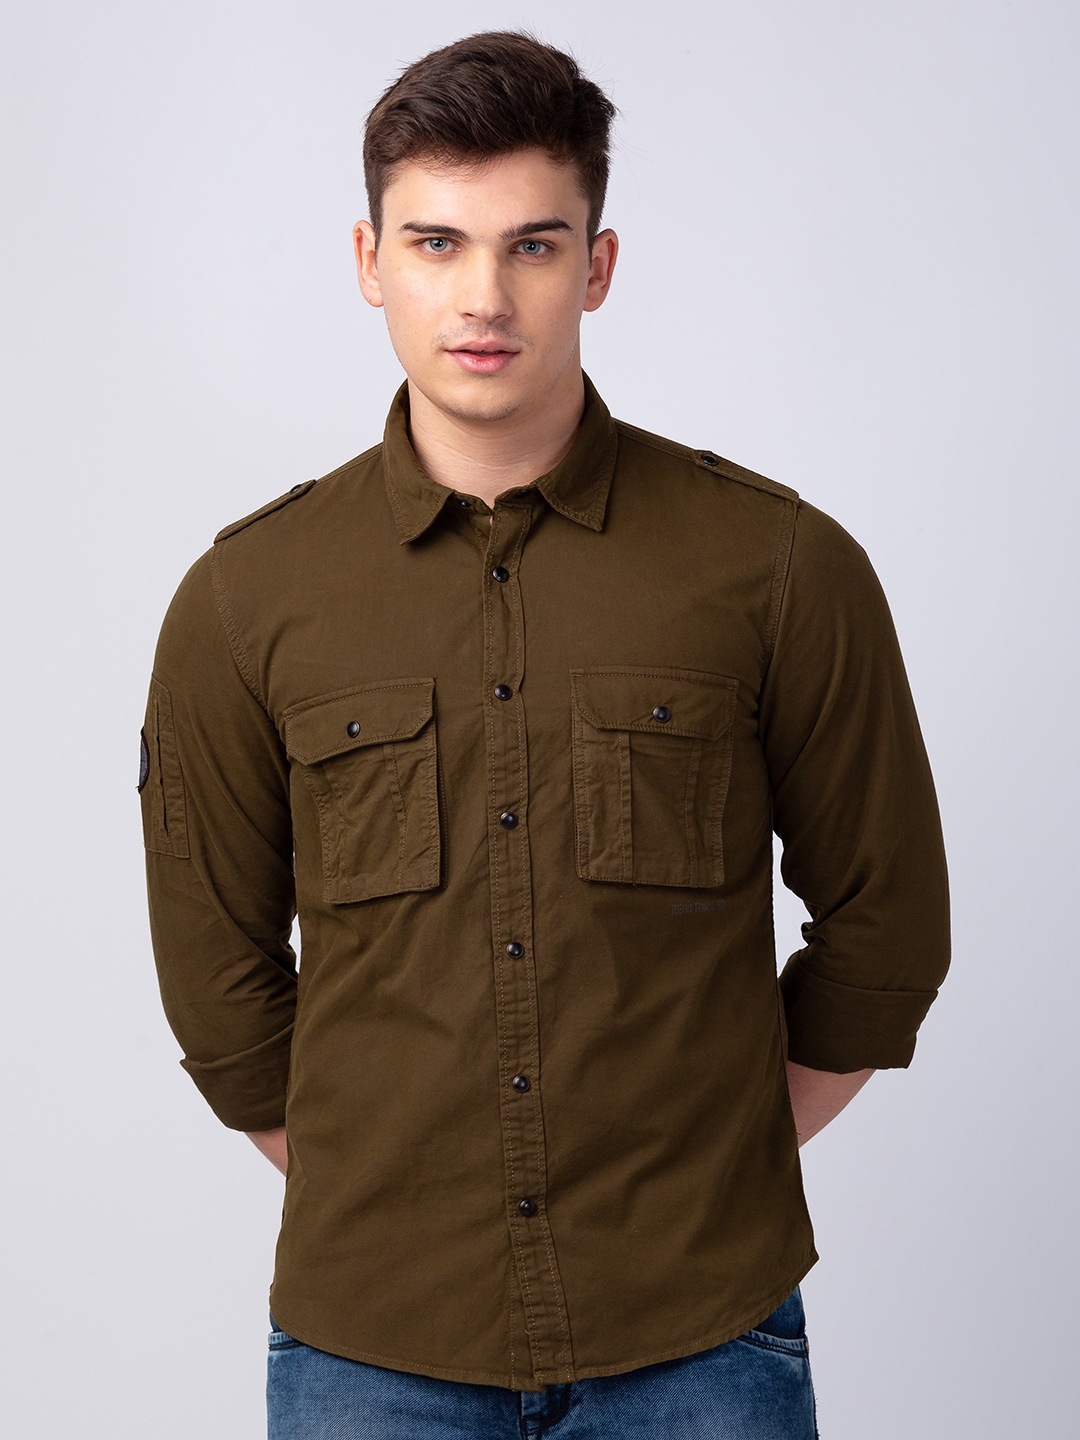 spykar | Men's Brown Cotton Solid Casual Shirts